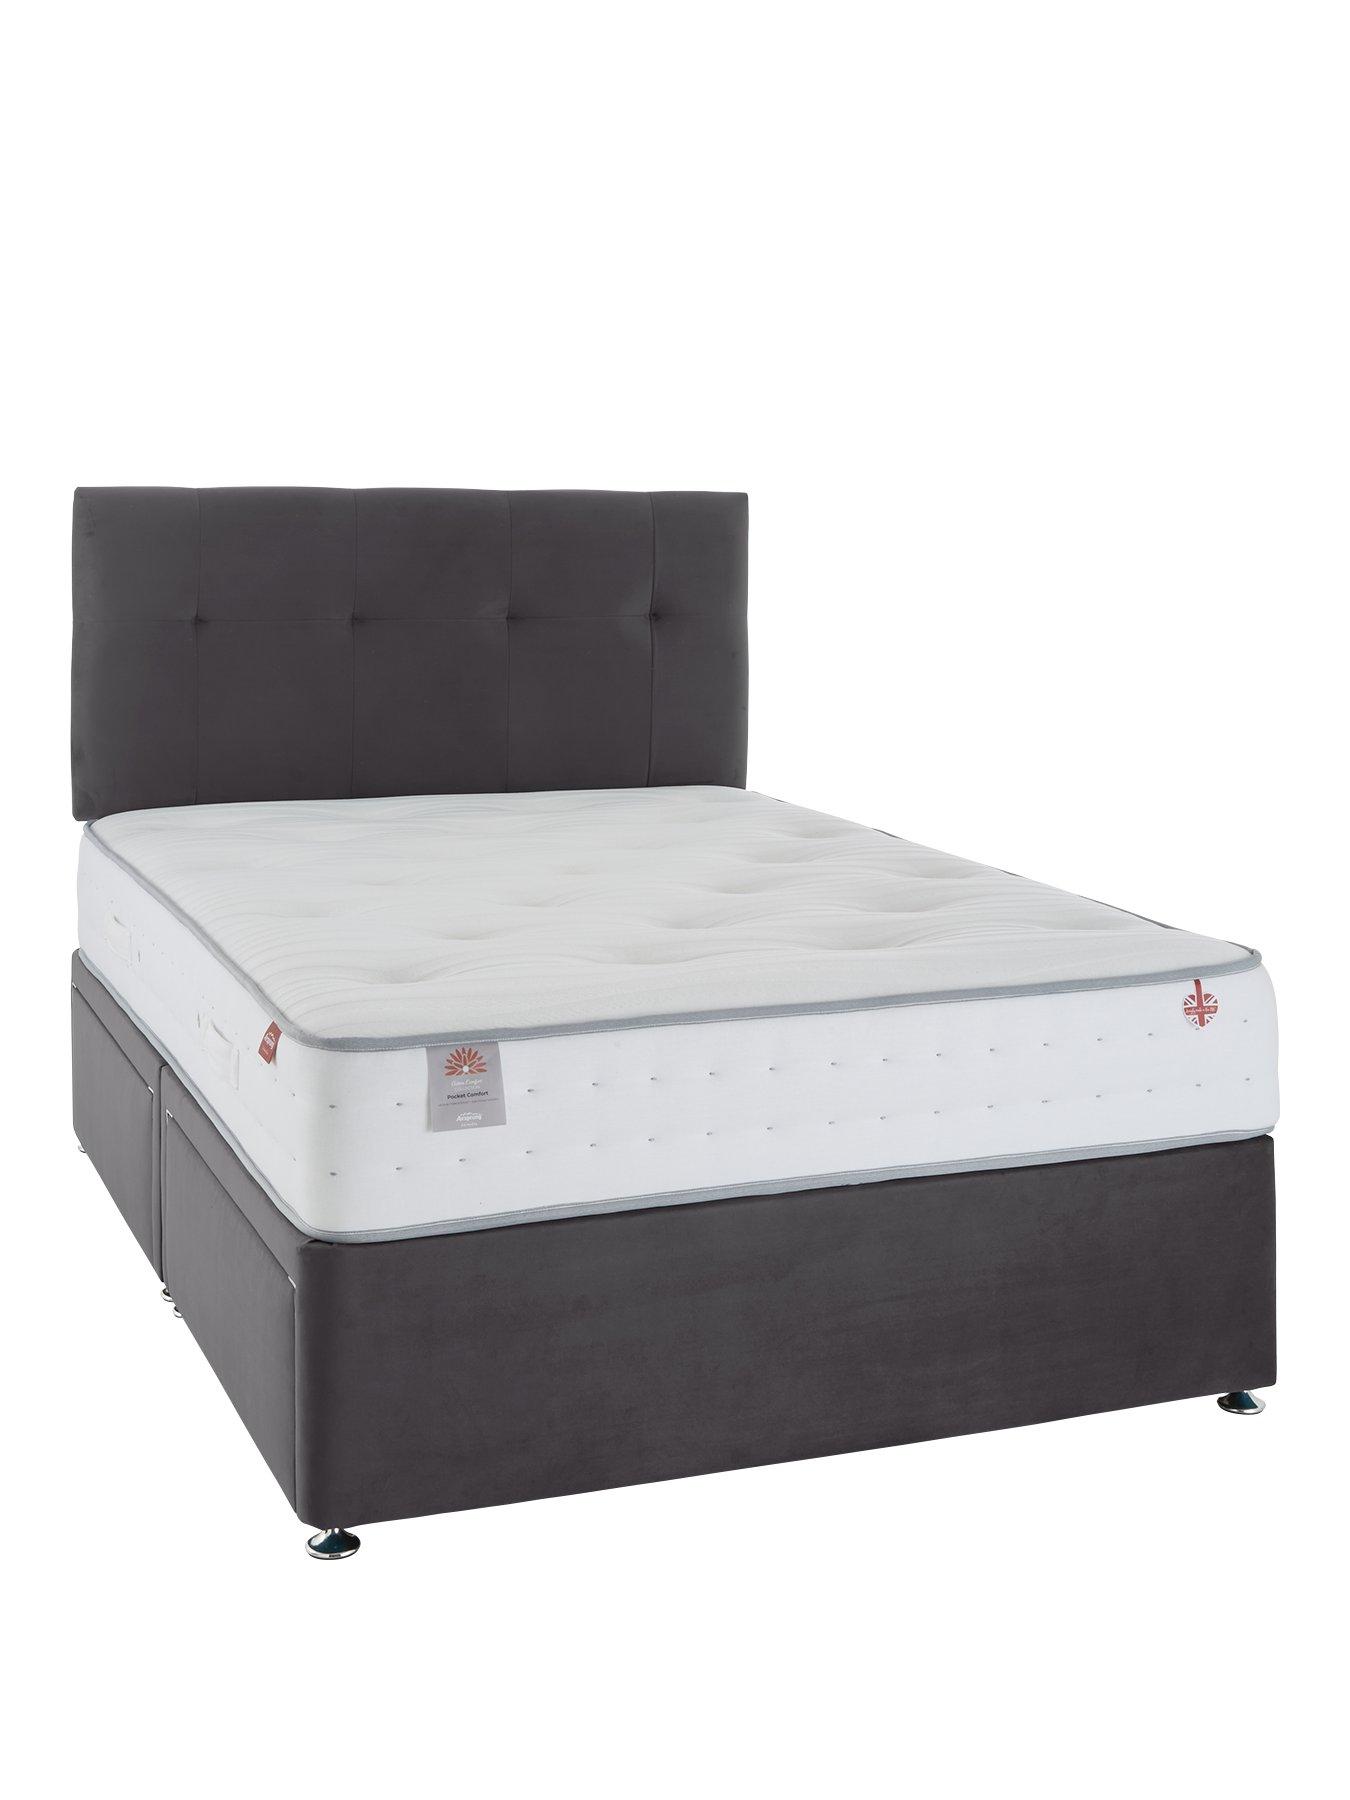 Bed Centre Charcoal Premier Divan Bed Base With Headboard And Storage Drawer-5FT King, King 150 x 200 cm, 2 Drawer One On Either Side Of Bottom Base With Headboard 